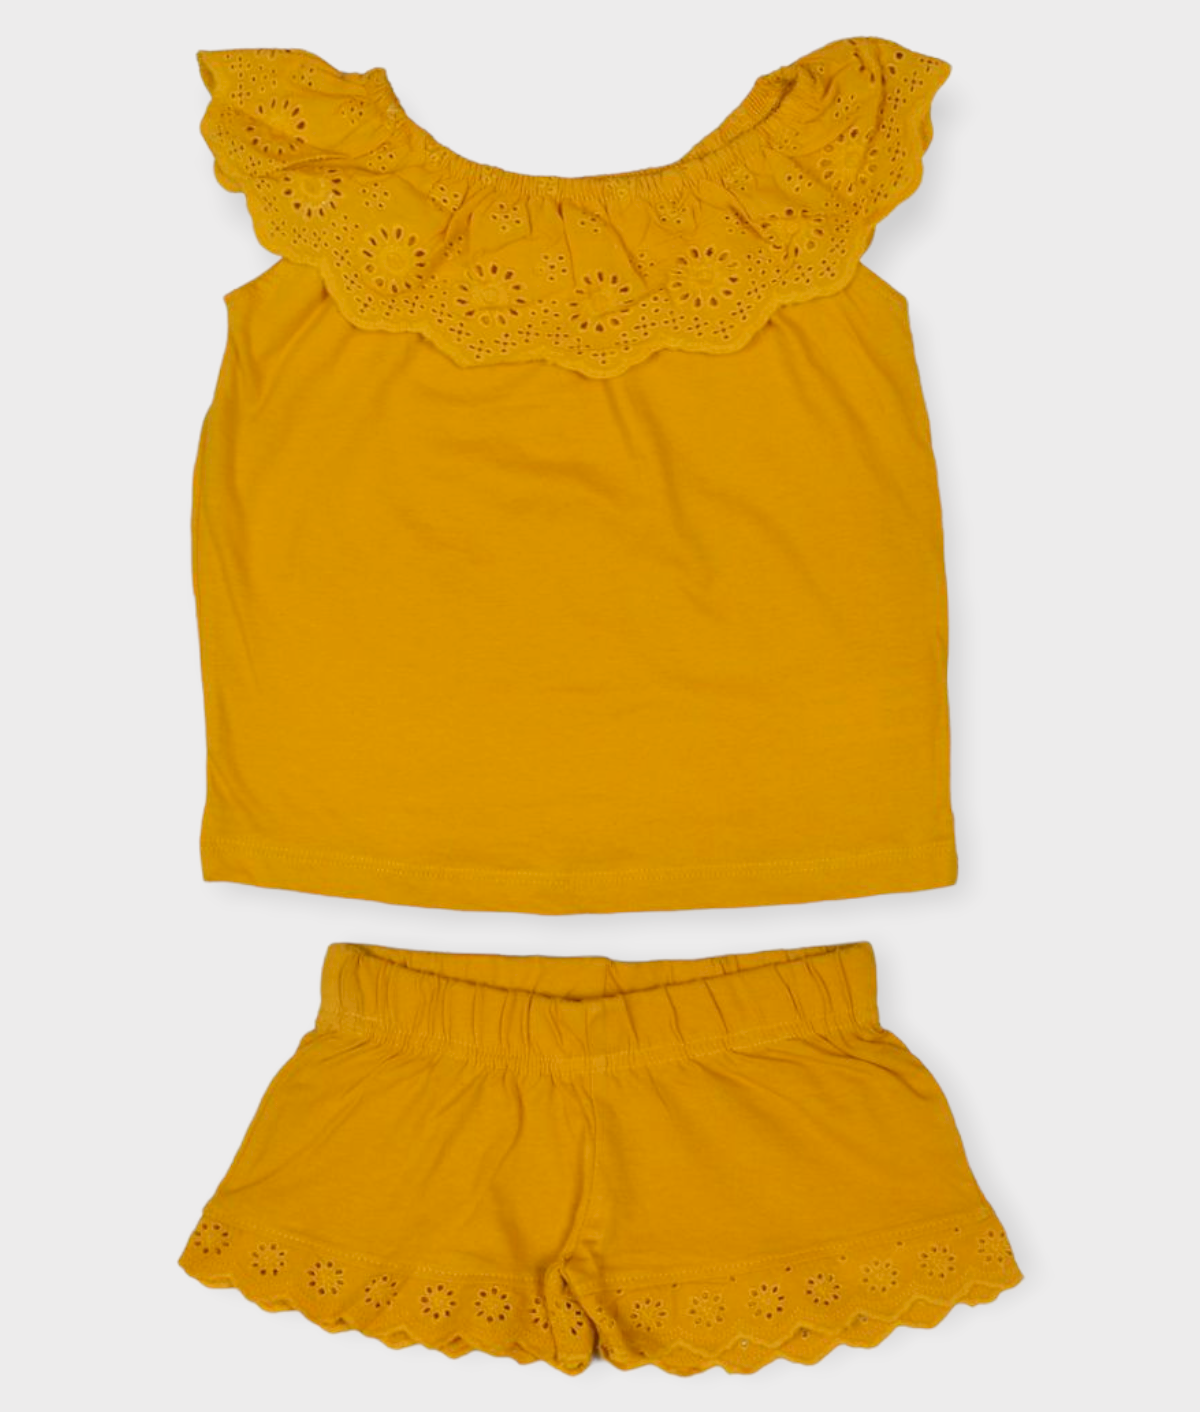     			Sathiyas - Yellow Cotton Girl's Top With Shorts ( Pack of 1 )